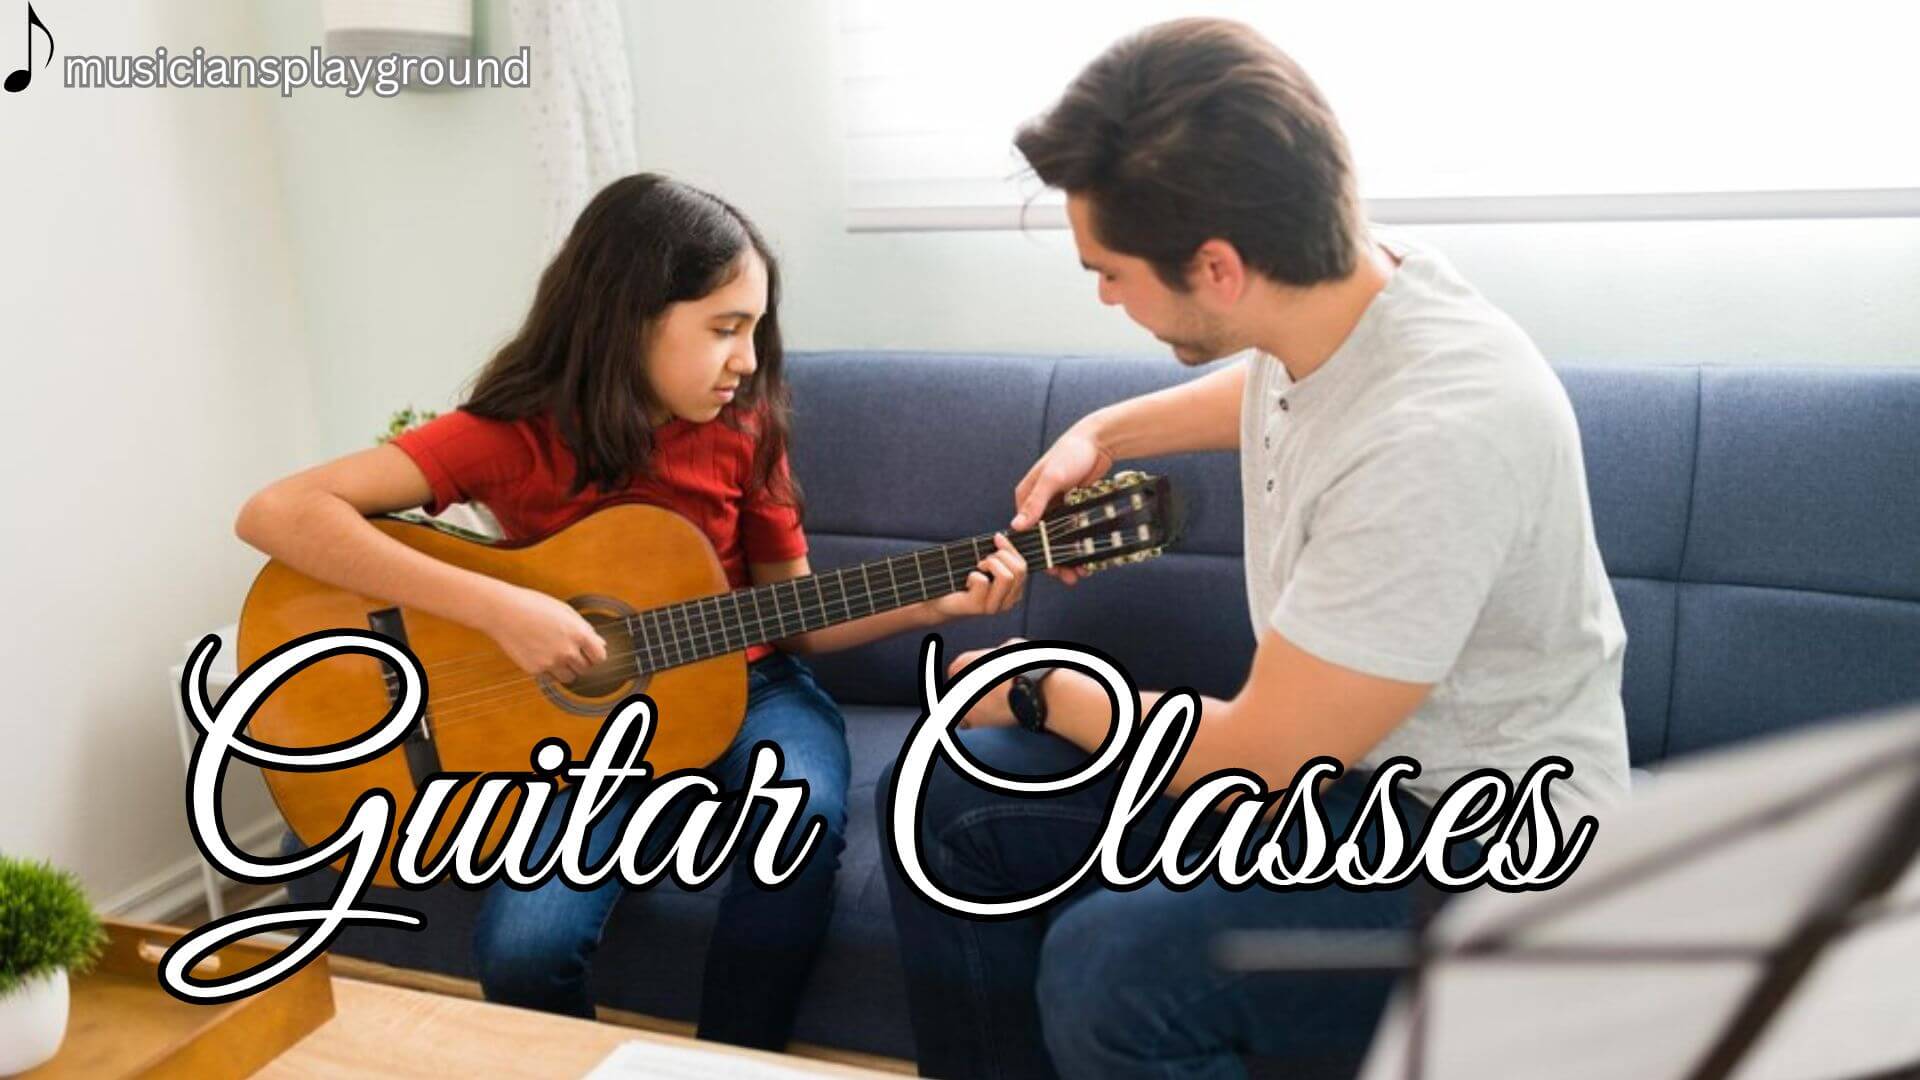 Welcome to Guitar Classes in Massachusetts